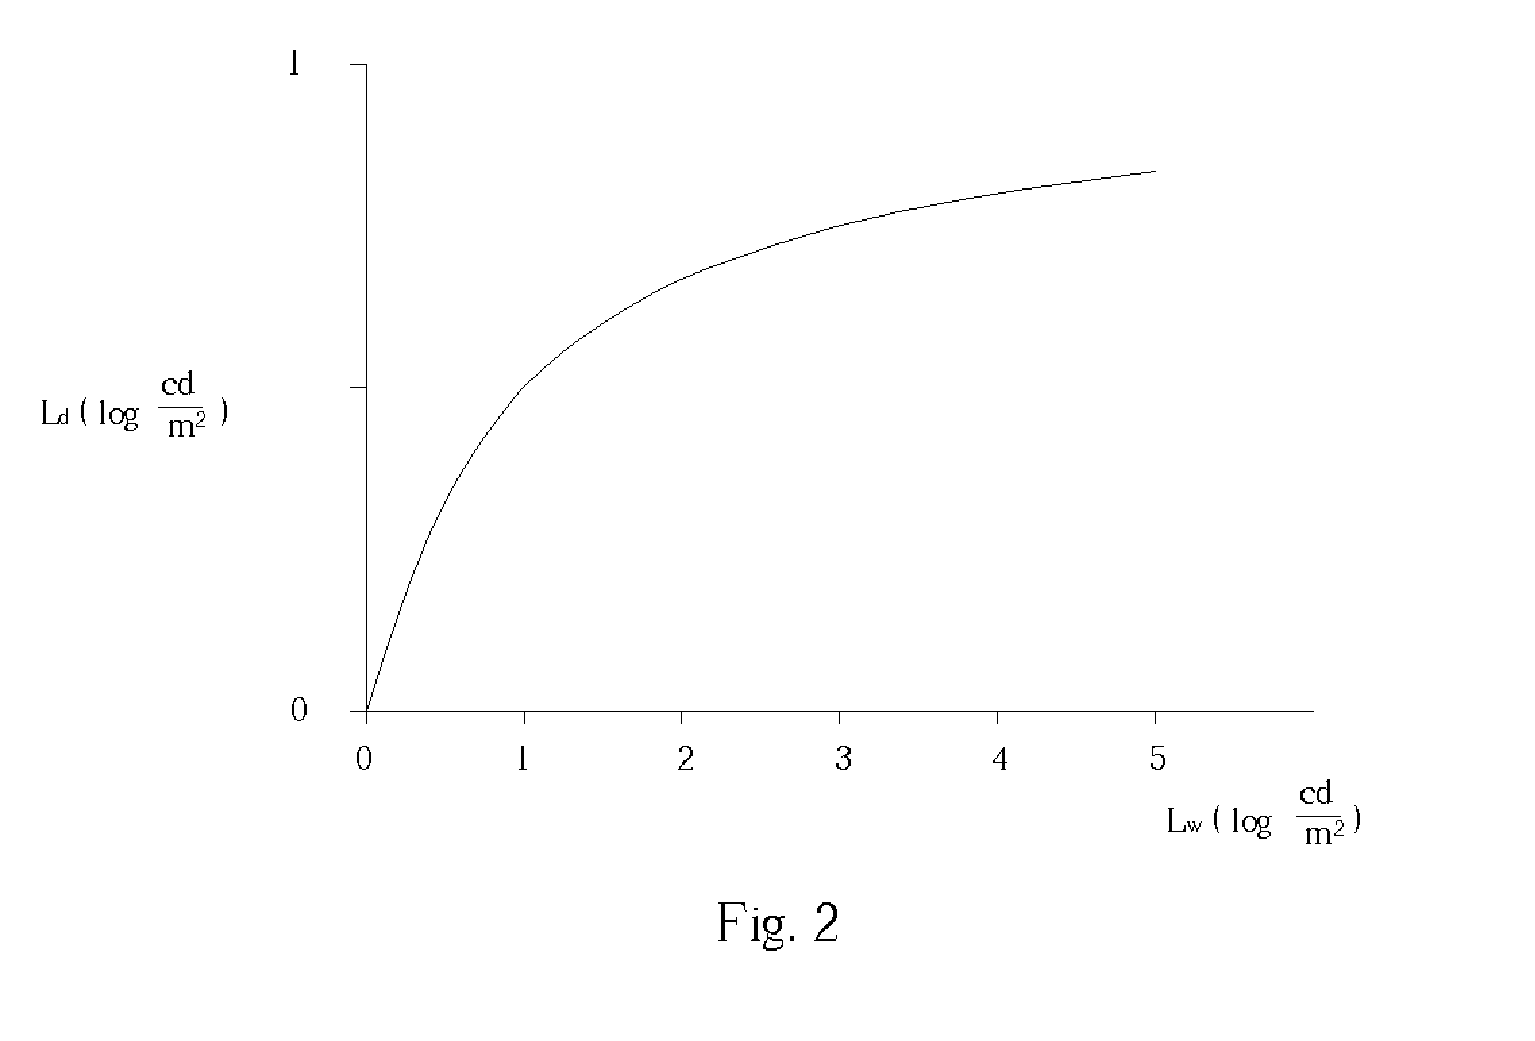 Method and apparatus for transforming a high dynamic range image into a low dynamic range image